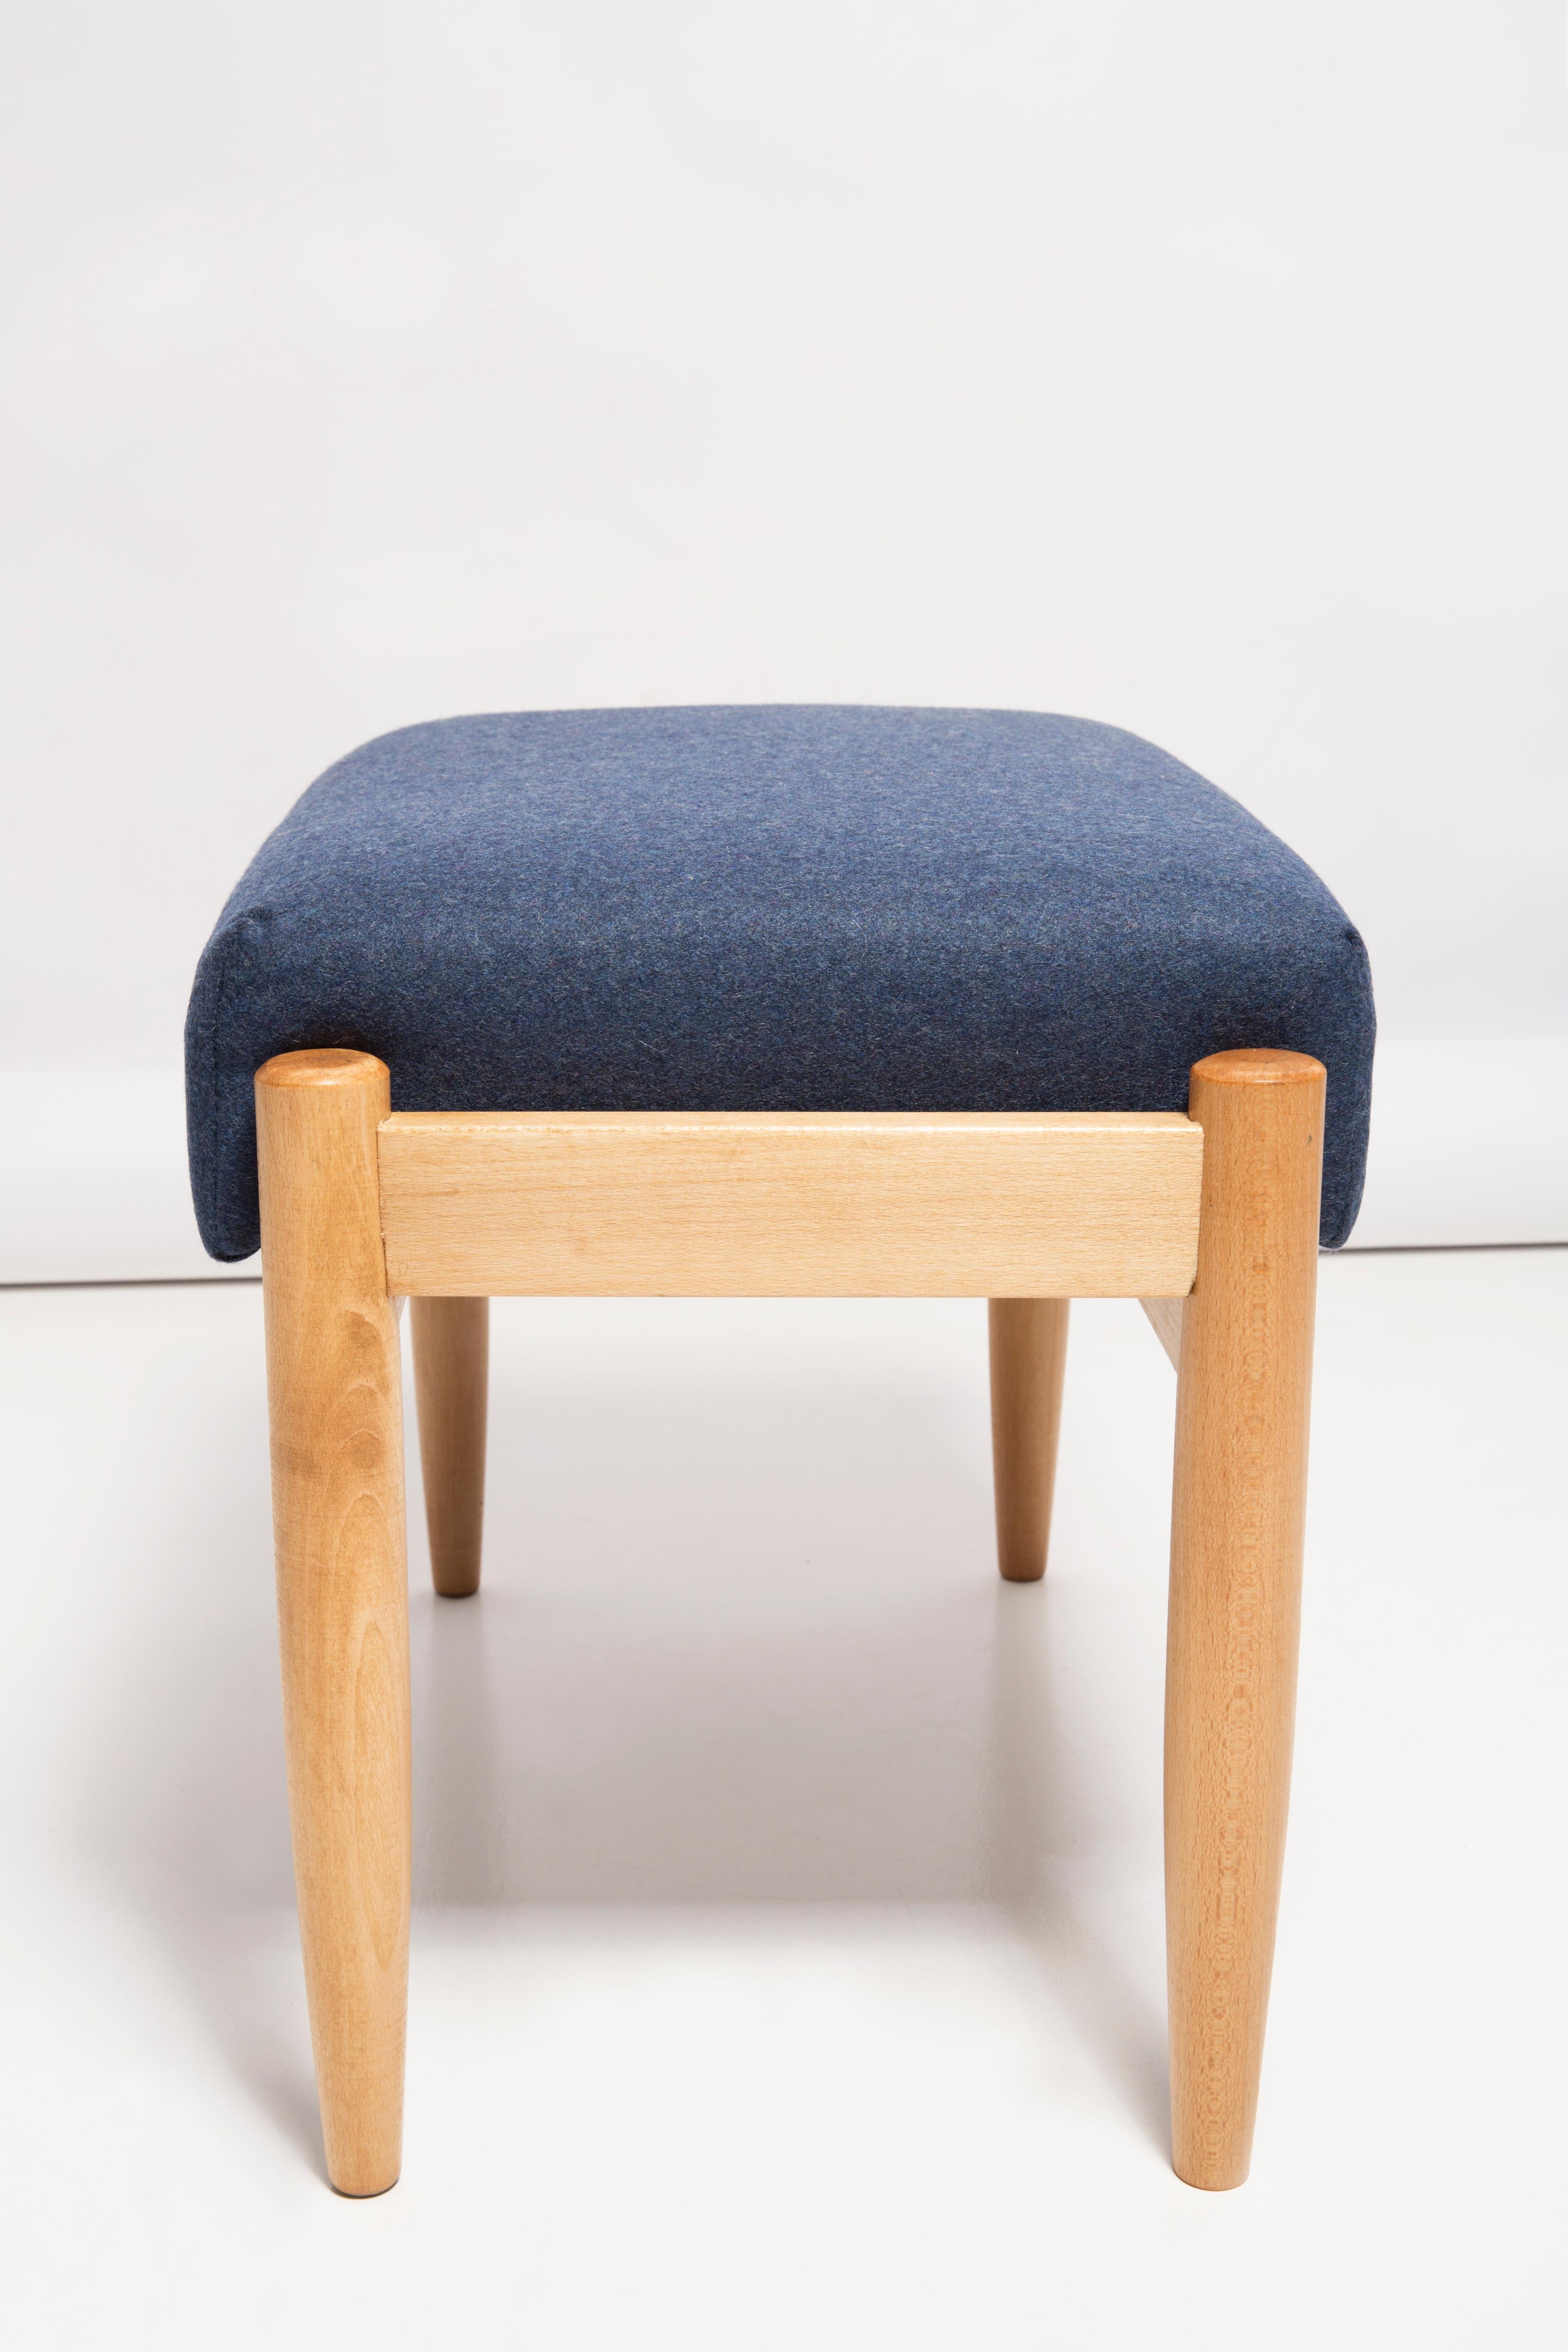 Stools from the turn of the 1960s. Beautiful navy blue high quality wool upholstery. The stools consists of an upholstered part, a seat and wooden legs narrowing downwards, characteristic of the 1960s style. We can prepare this set also in another